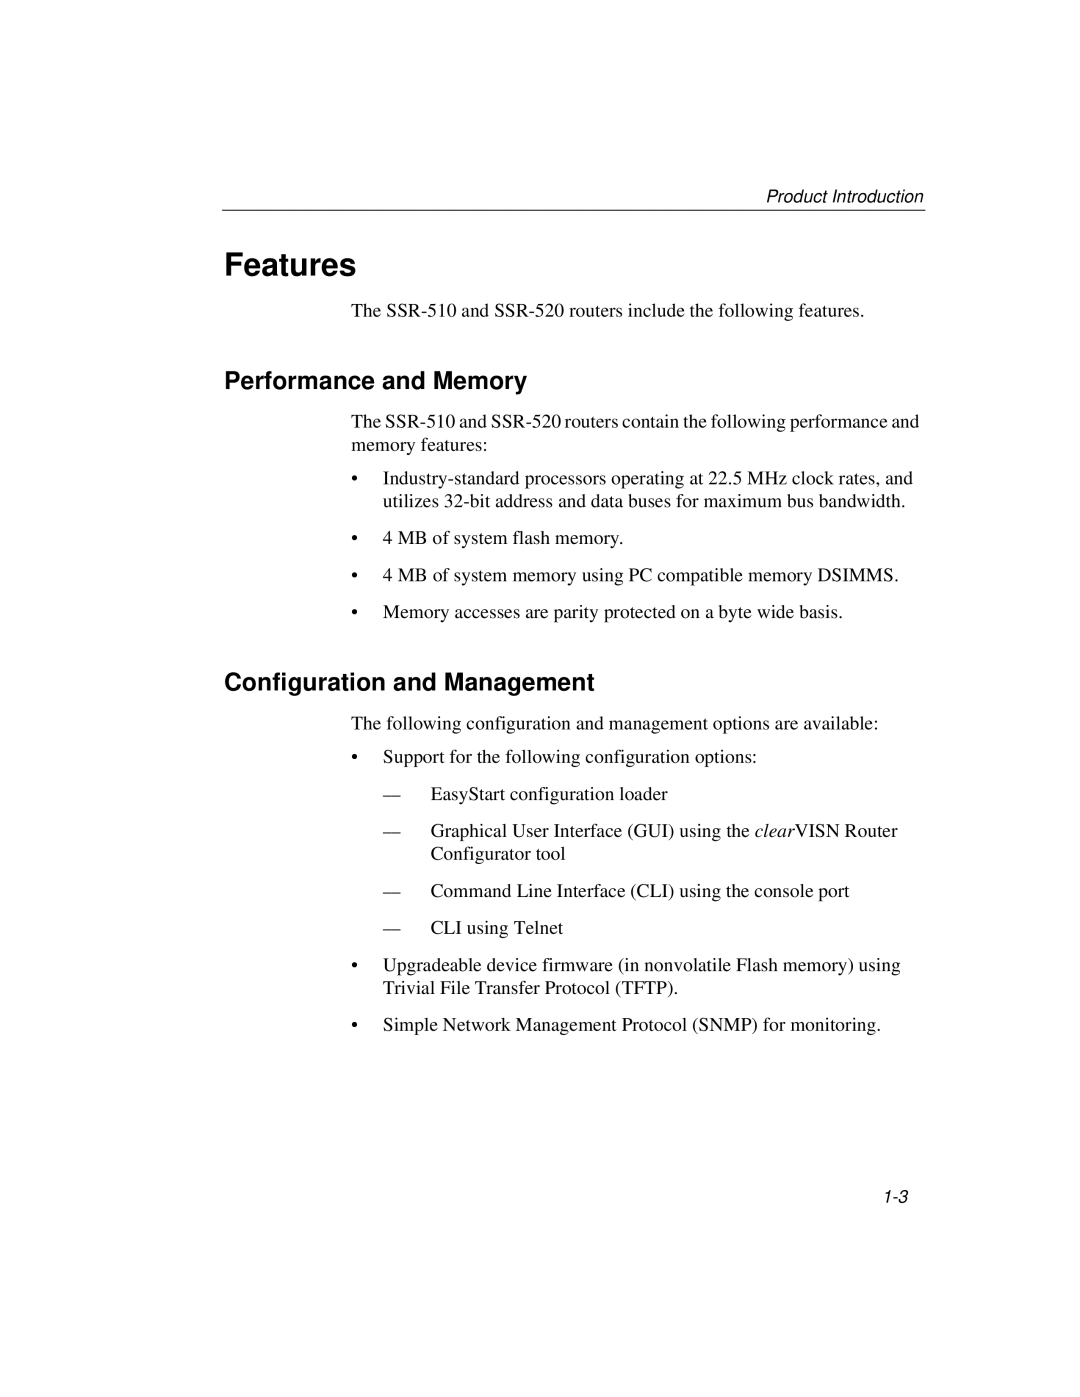 Cabletron Systems 520, 510 manual Features, Performance and Memory, Configuration and Management 